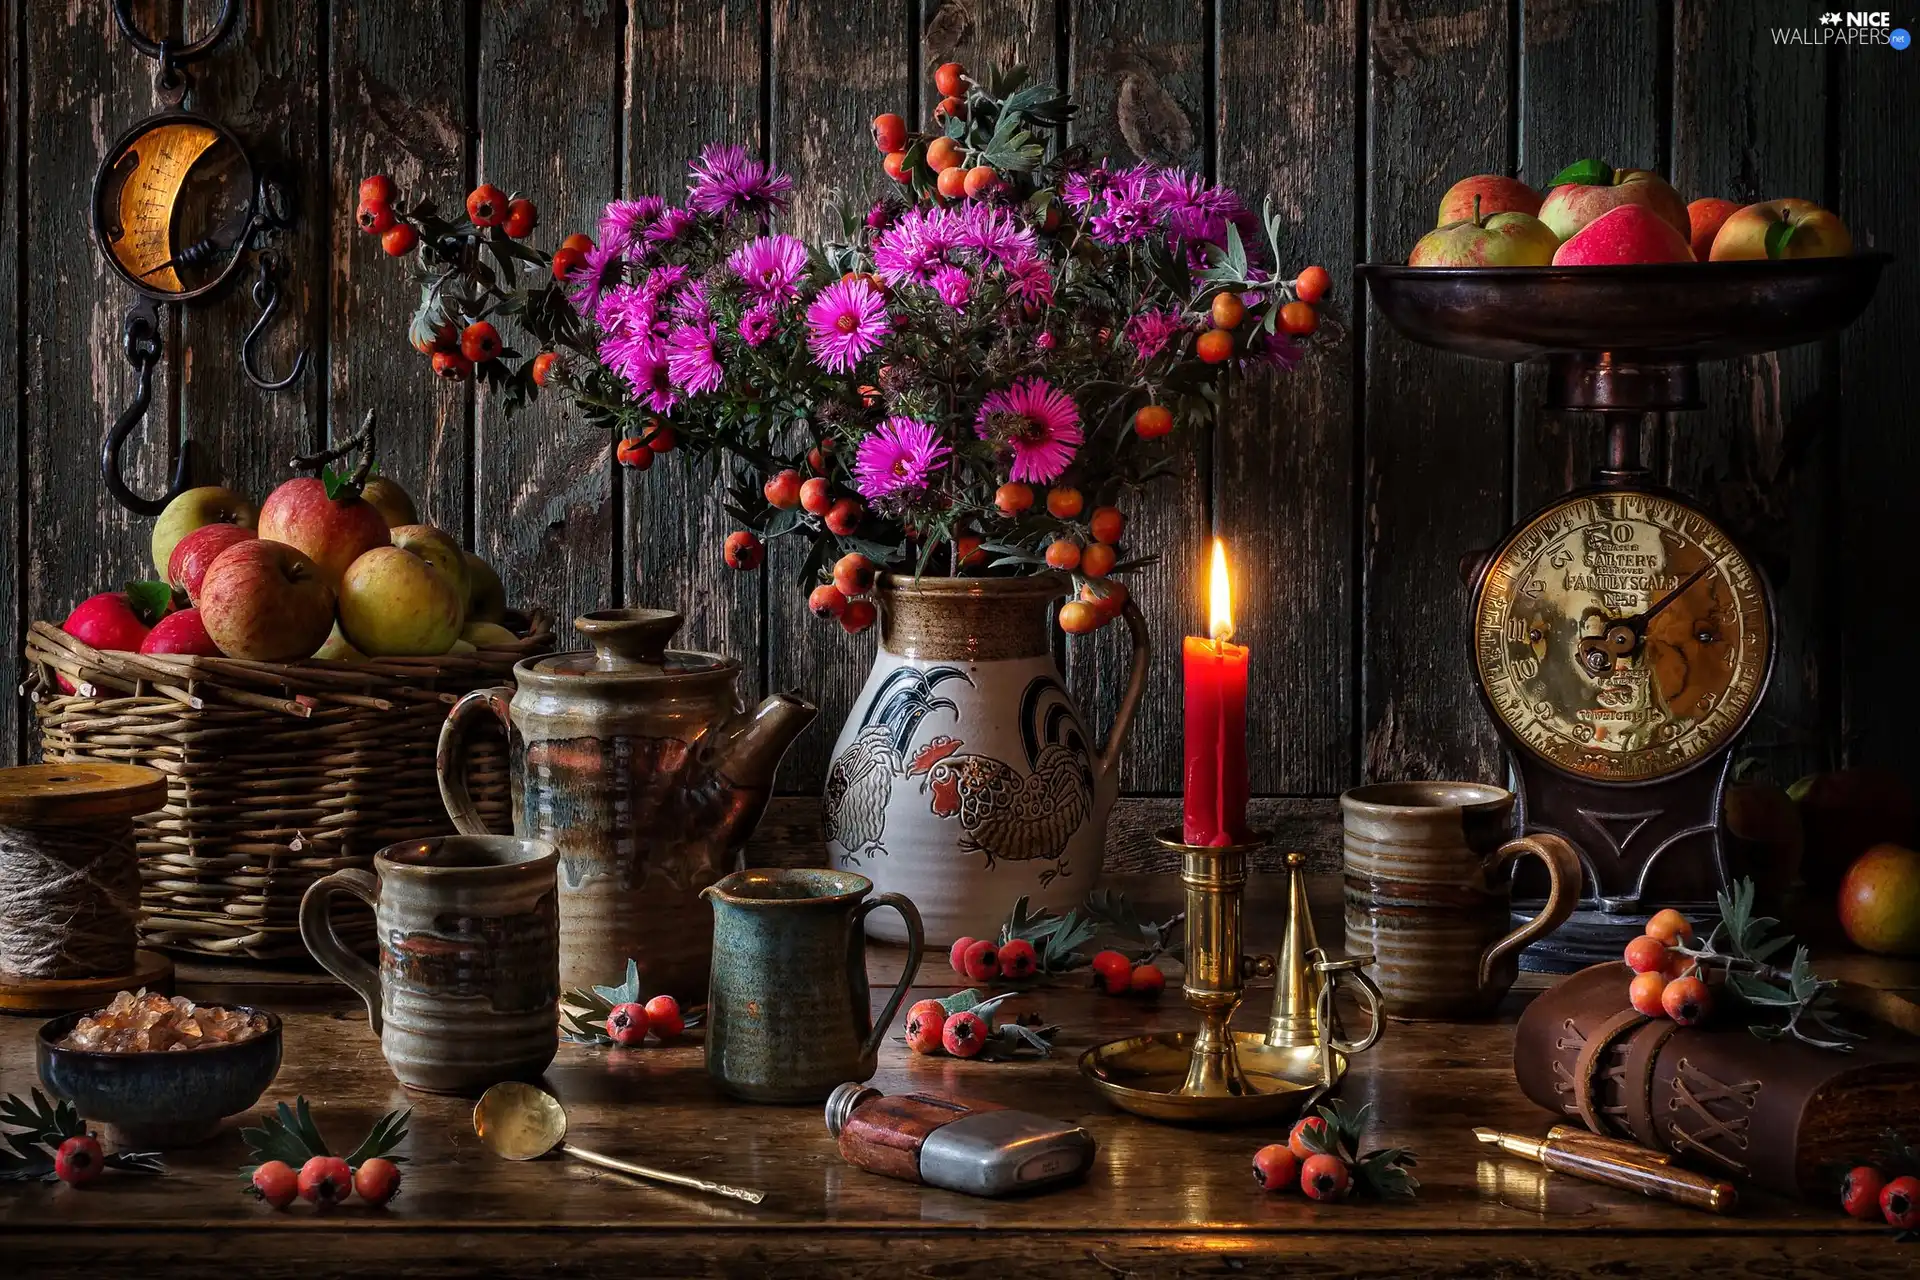 weight, candle, service, Astra, basket, composition, teapot, Vase, Flowers, apples